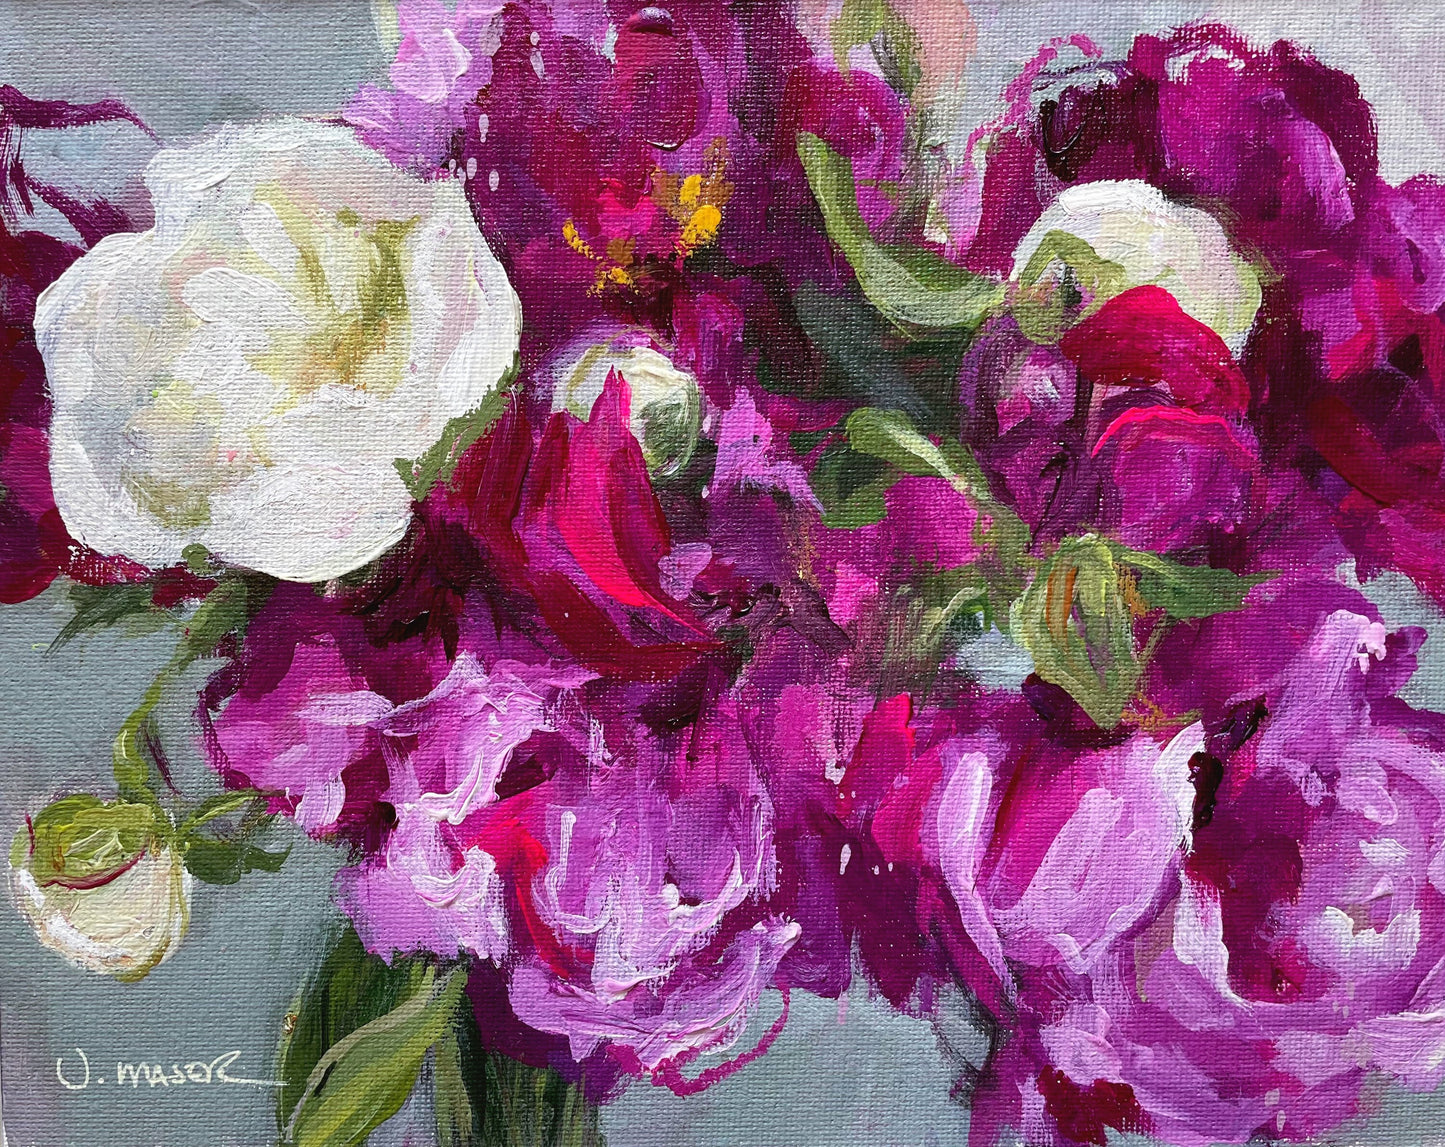 Peonies Study - Original acrylic and pastel. Mixed media floral painting. Impressionistic floral art.